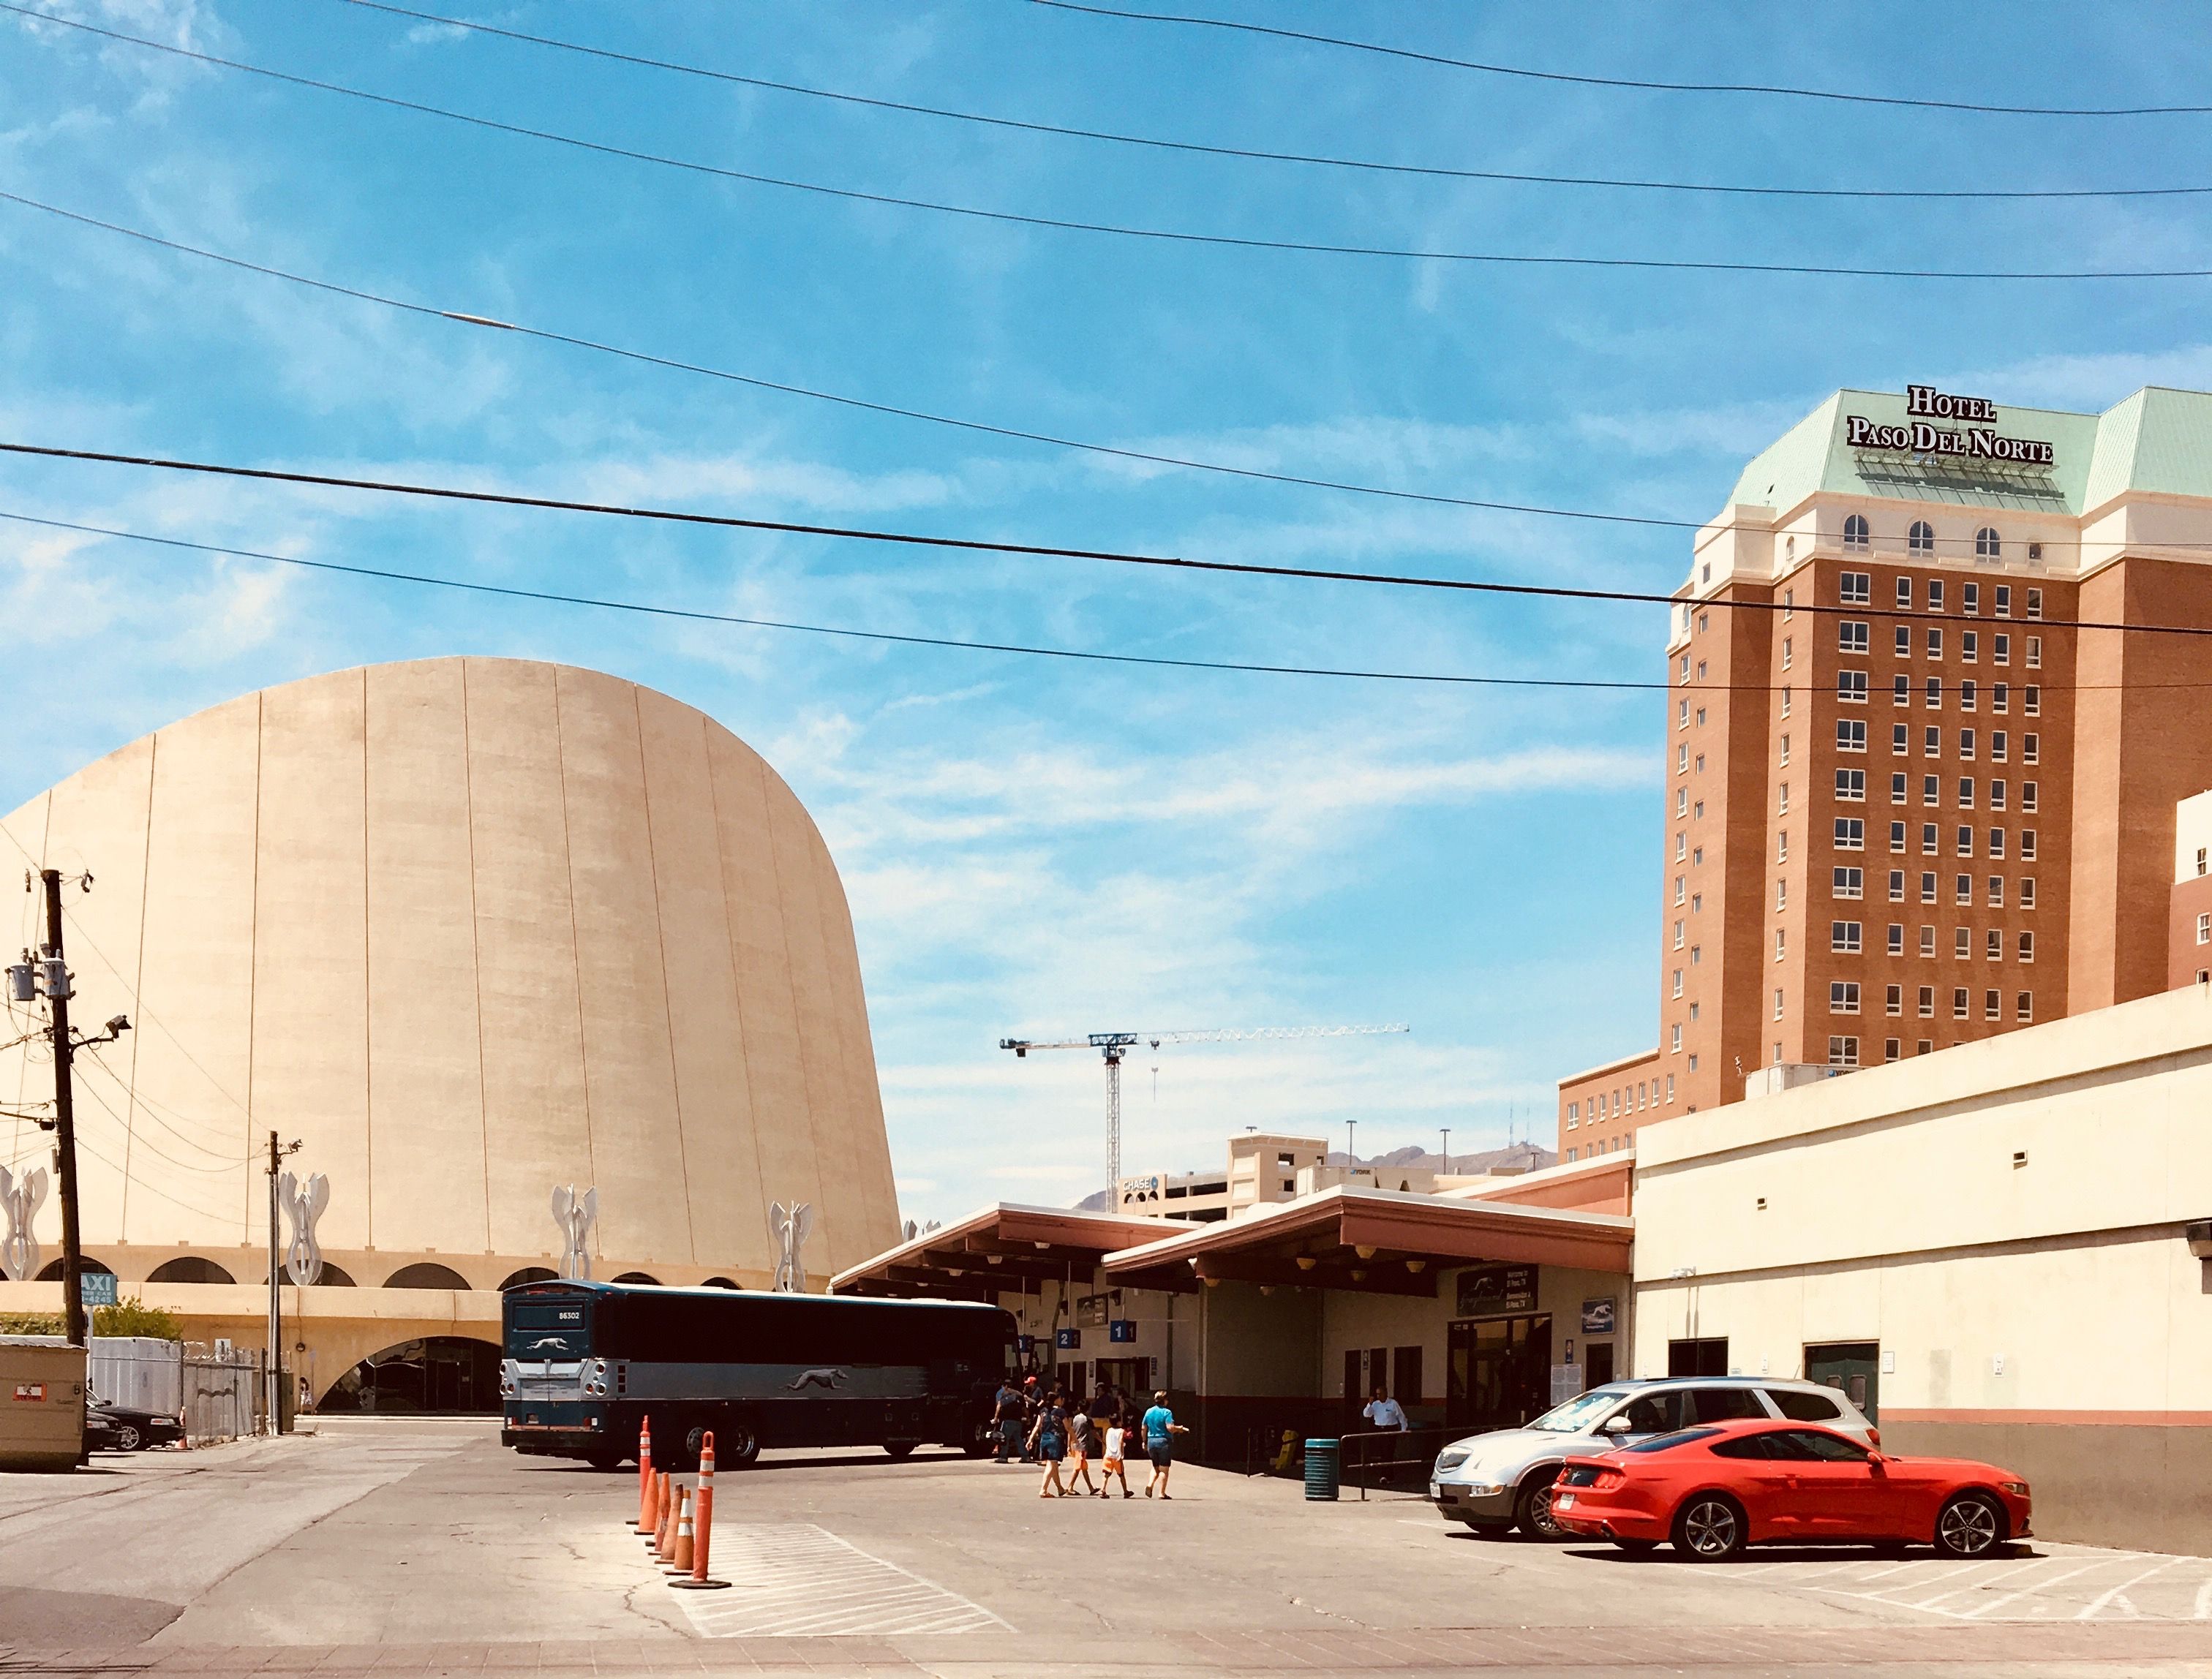 A Greyhound bus station, less than a mile from Casa Vides. Most of the migrants who stay at Casa Vides ride a plane or bus to their final destination. Image by Lily Moore-Eissenberg. United States, 2019.